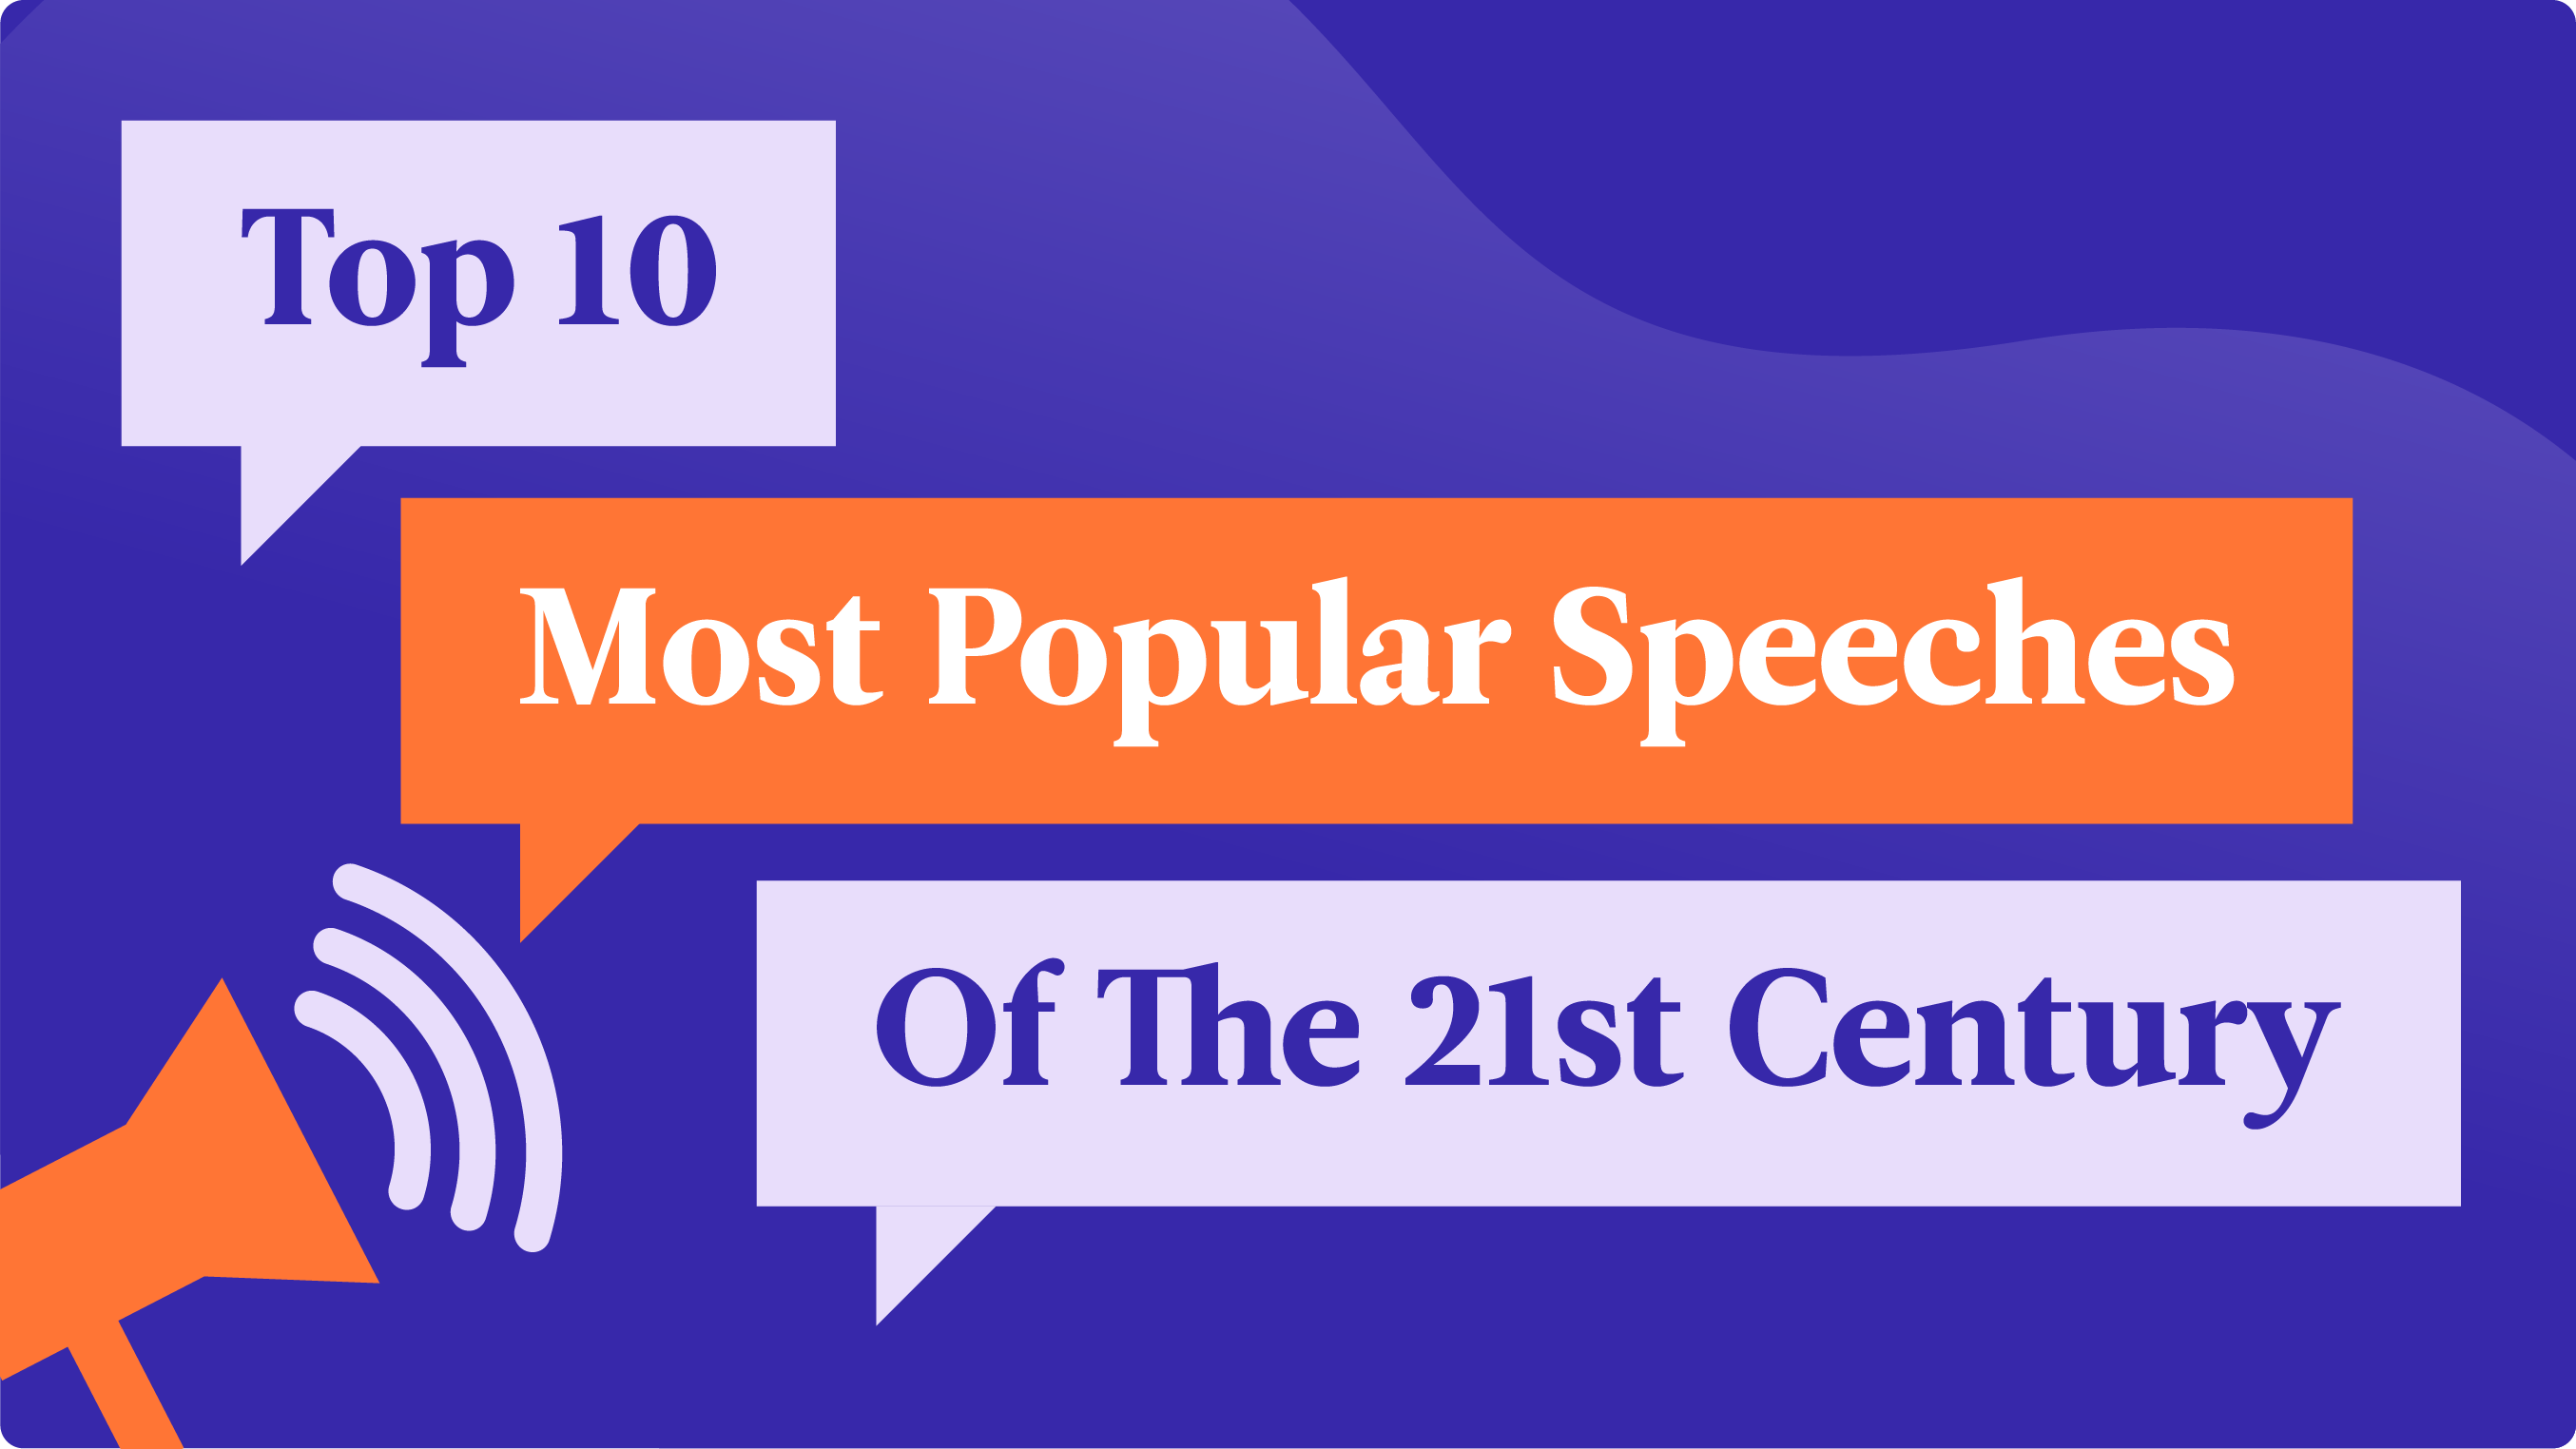 Famous Speeches of the 21st century